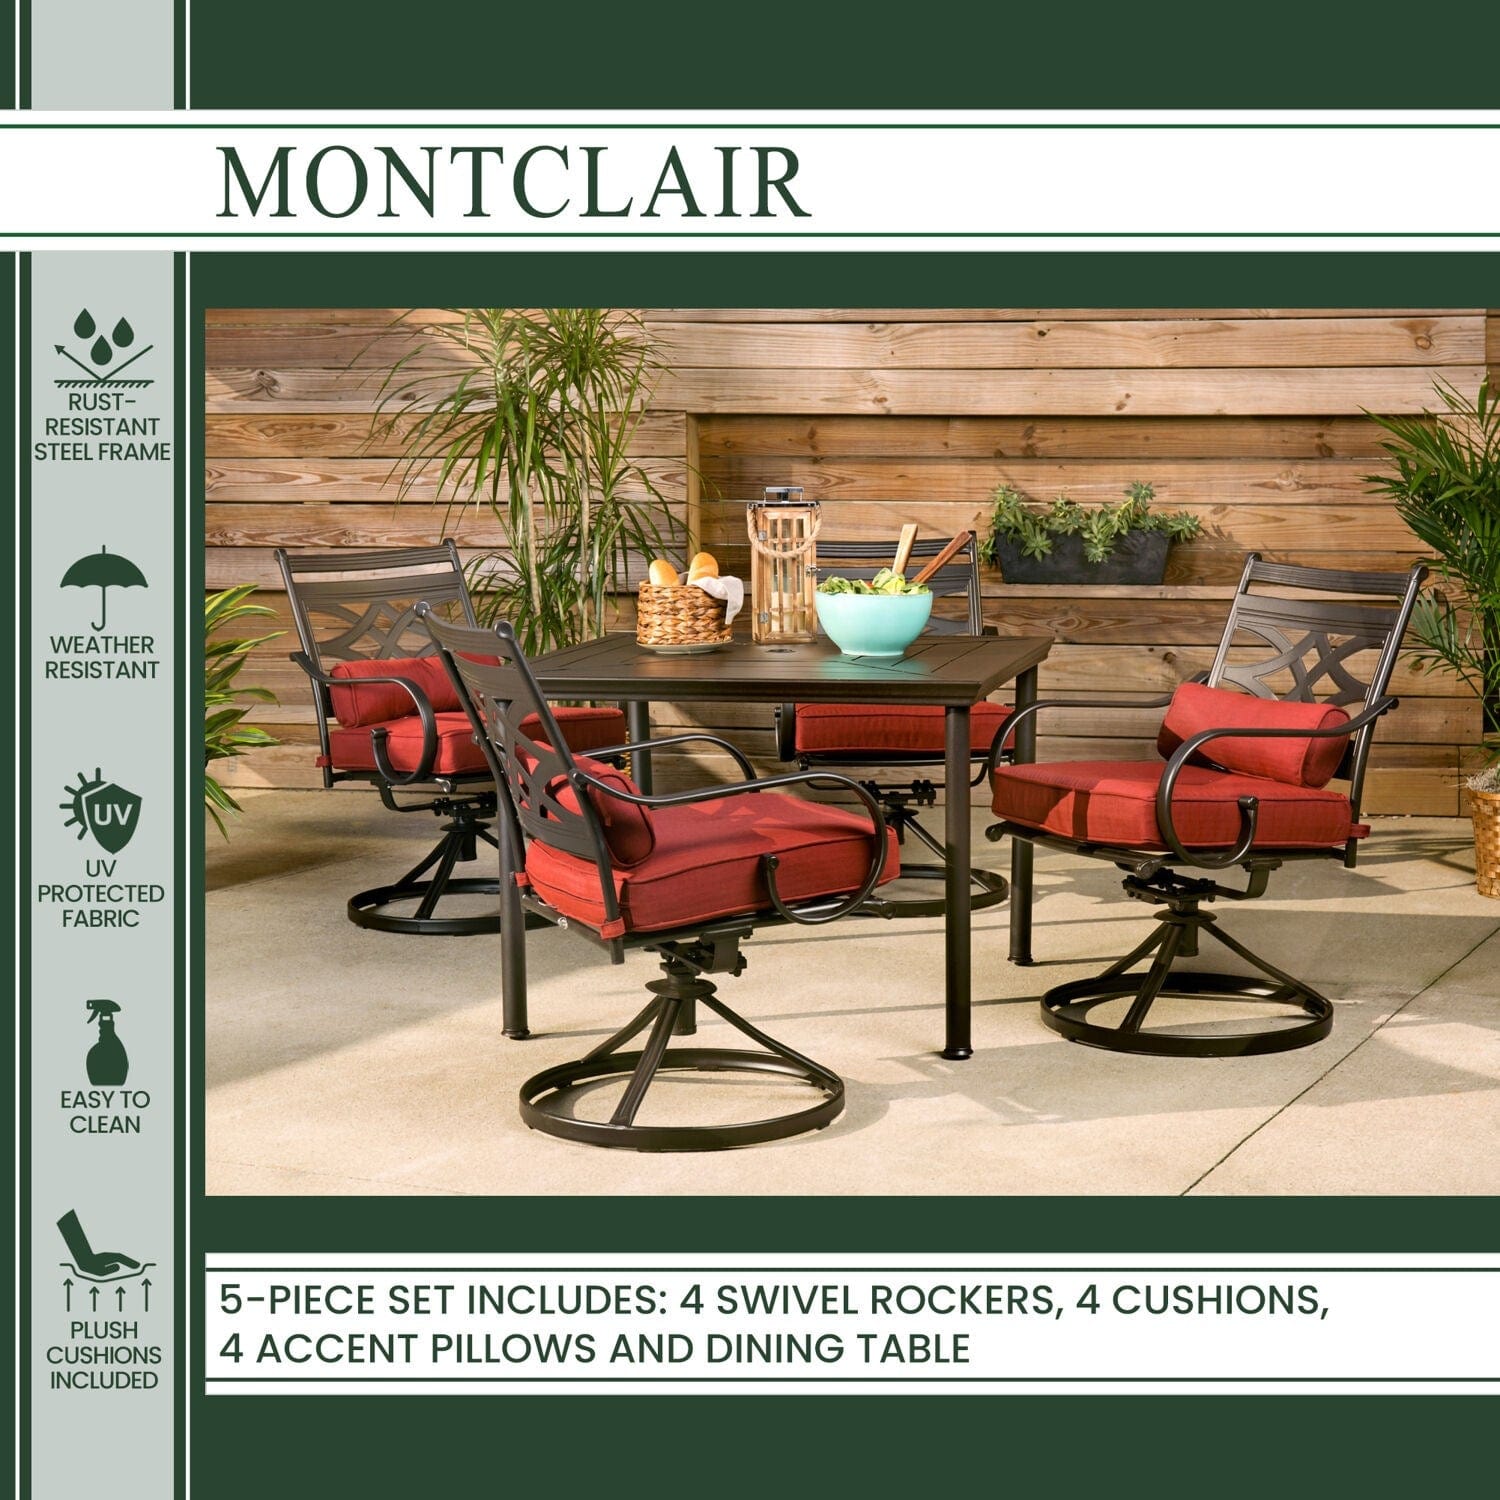 Hanover Outdoor Dining Set Hanover Montclair 5-Piece Patio Dining Set in Chili Red with 4 Swivel Rockers and a 40-Inch Square Table